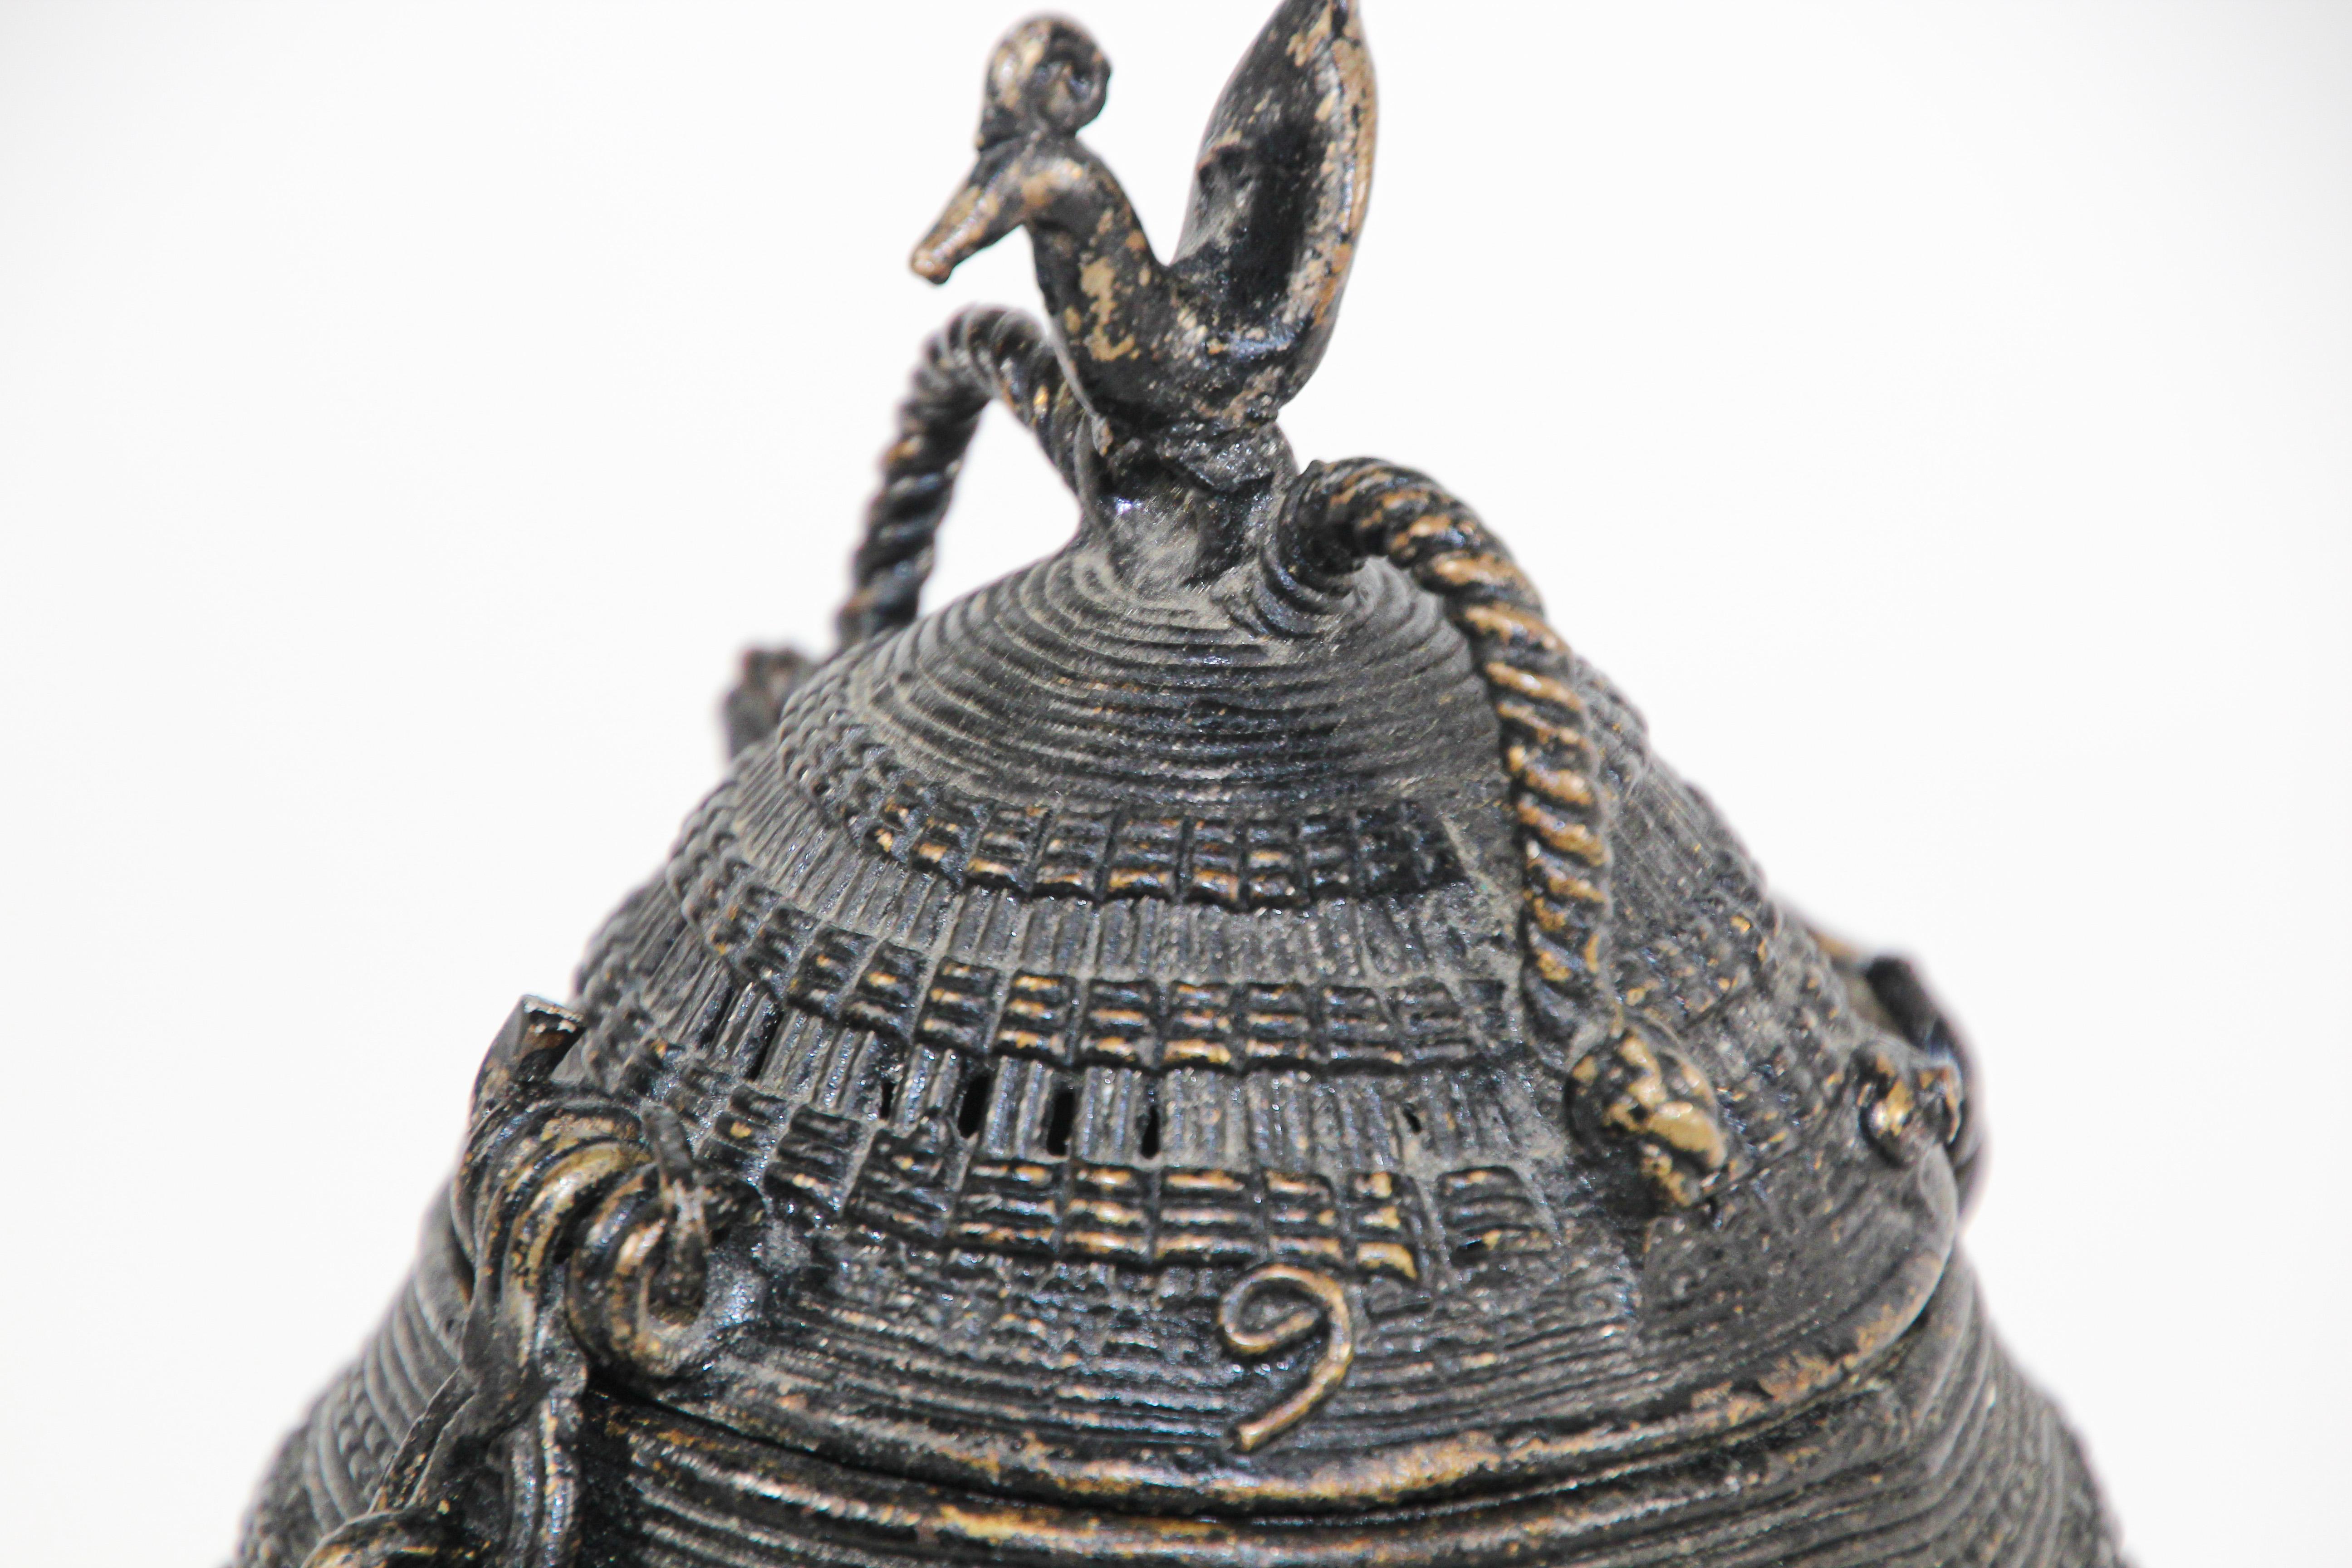 Indian Bronze Metal Incense Burner Lidded Box with Peacock Finial 2